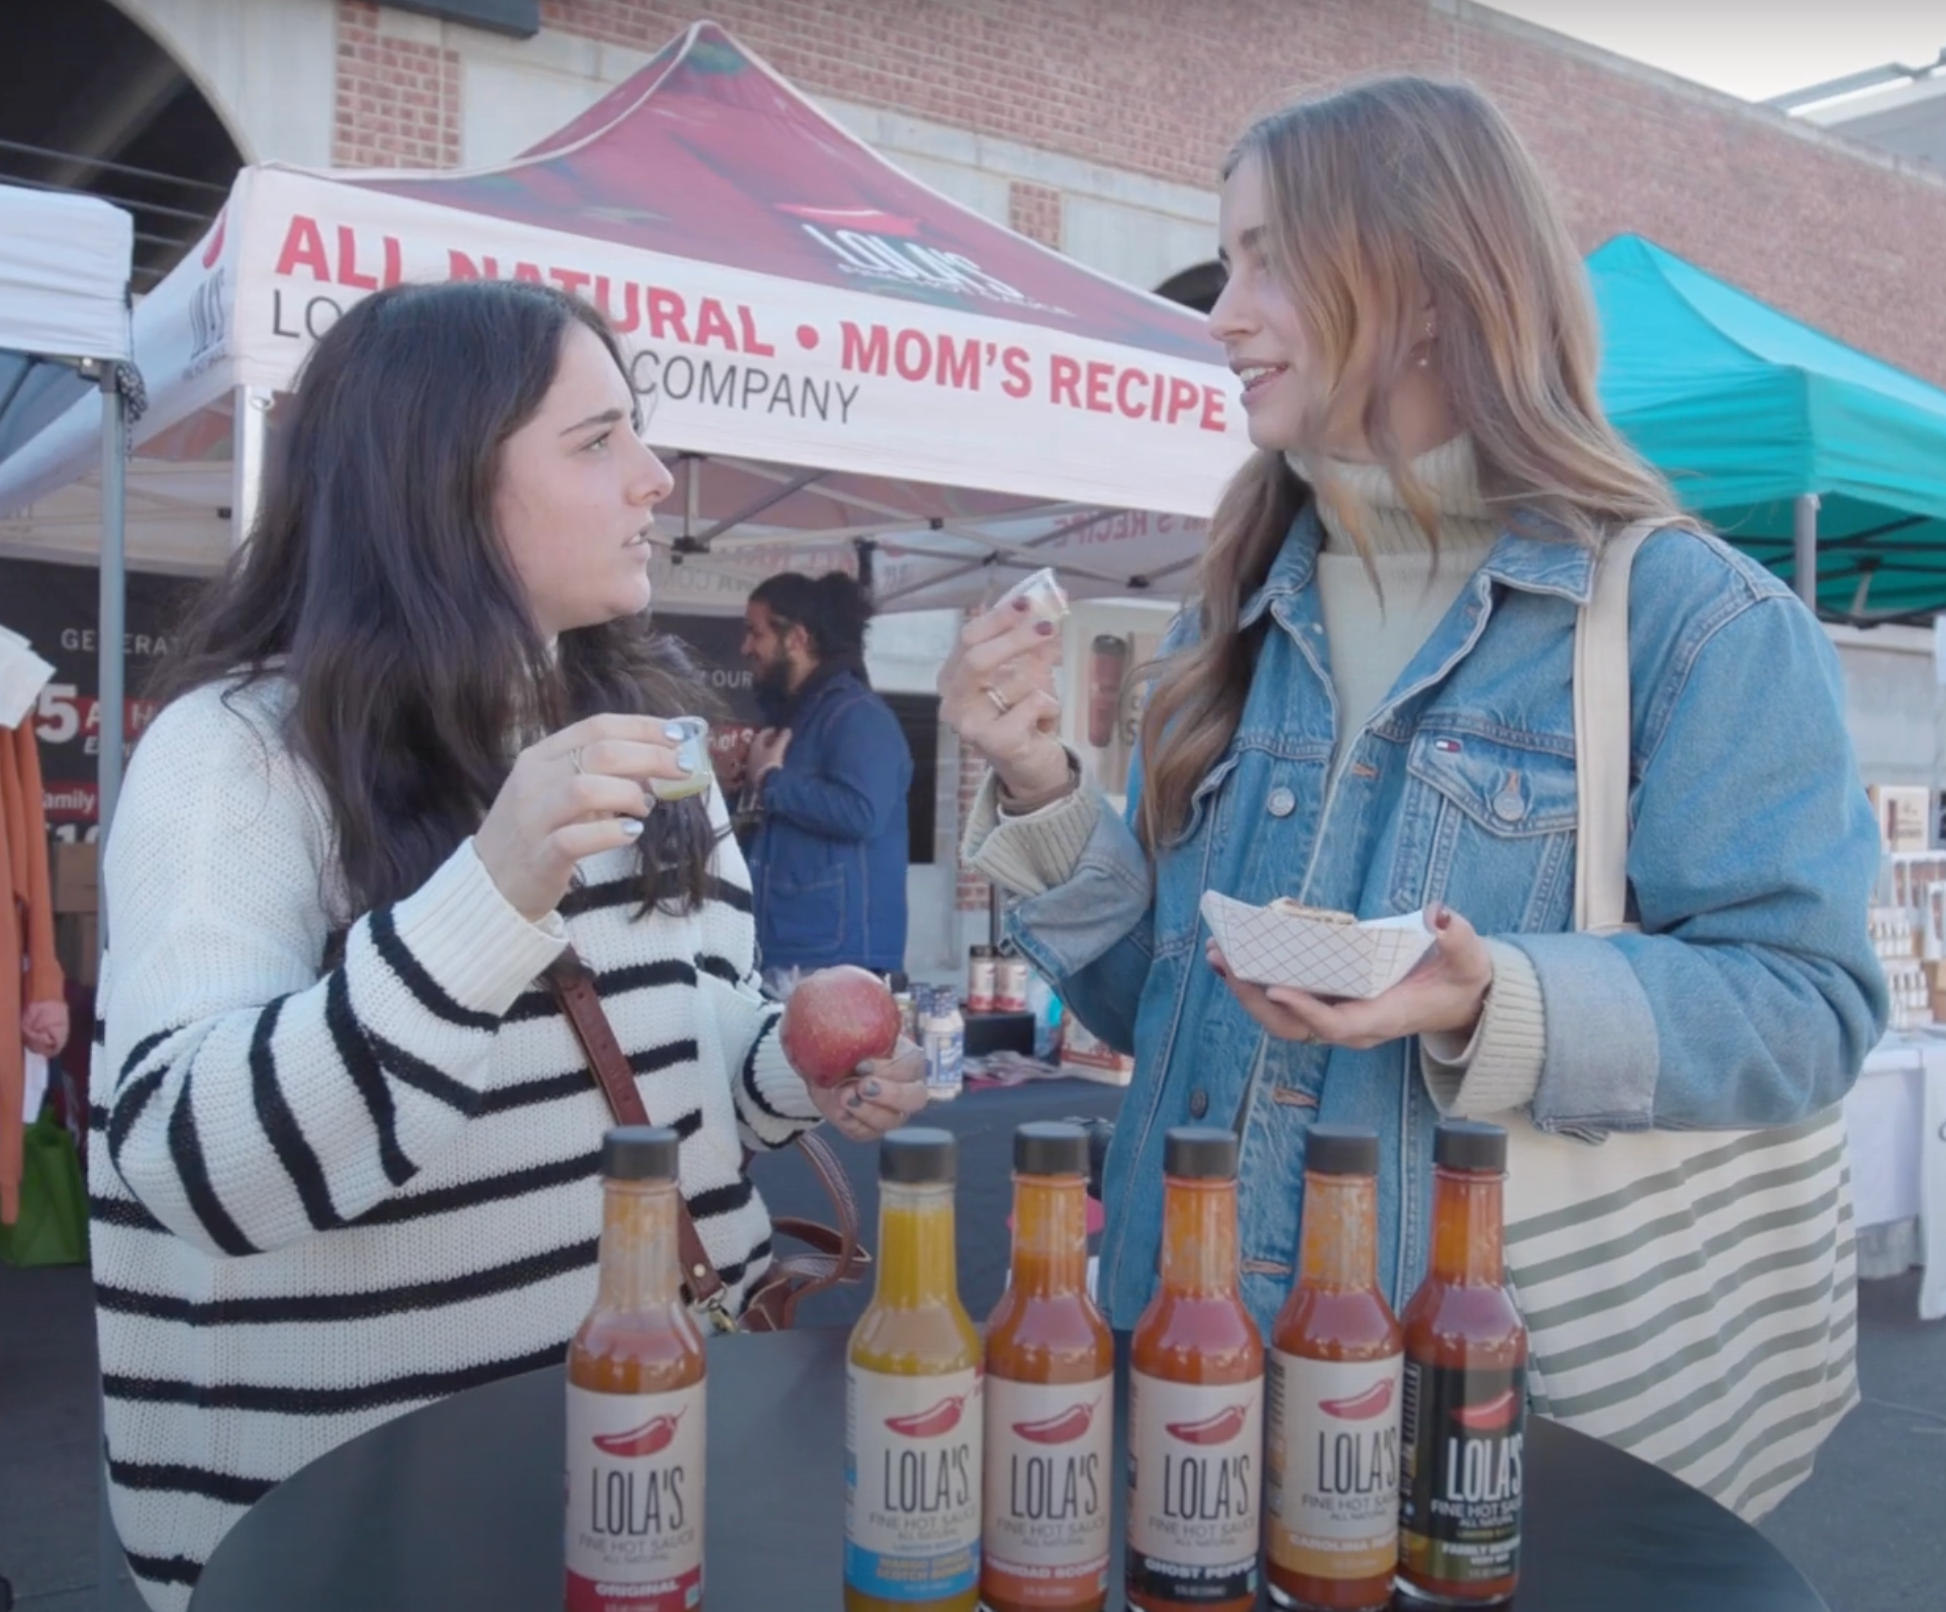 People React to Lola's Fine Hot Sauce at the Des Moines Iowa Farmers' Market